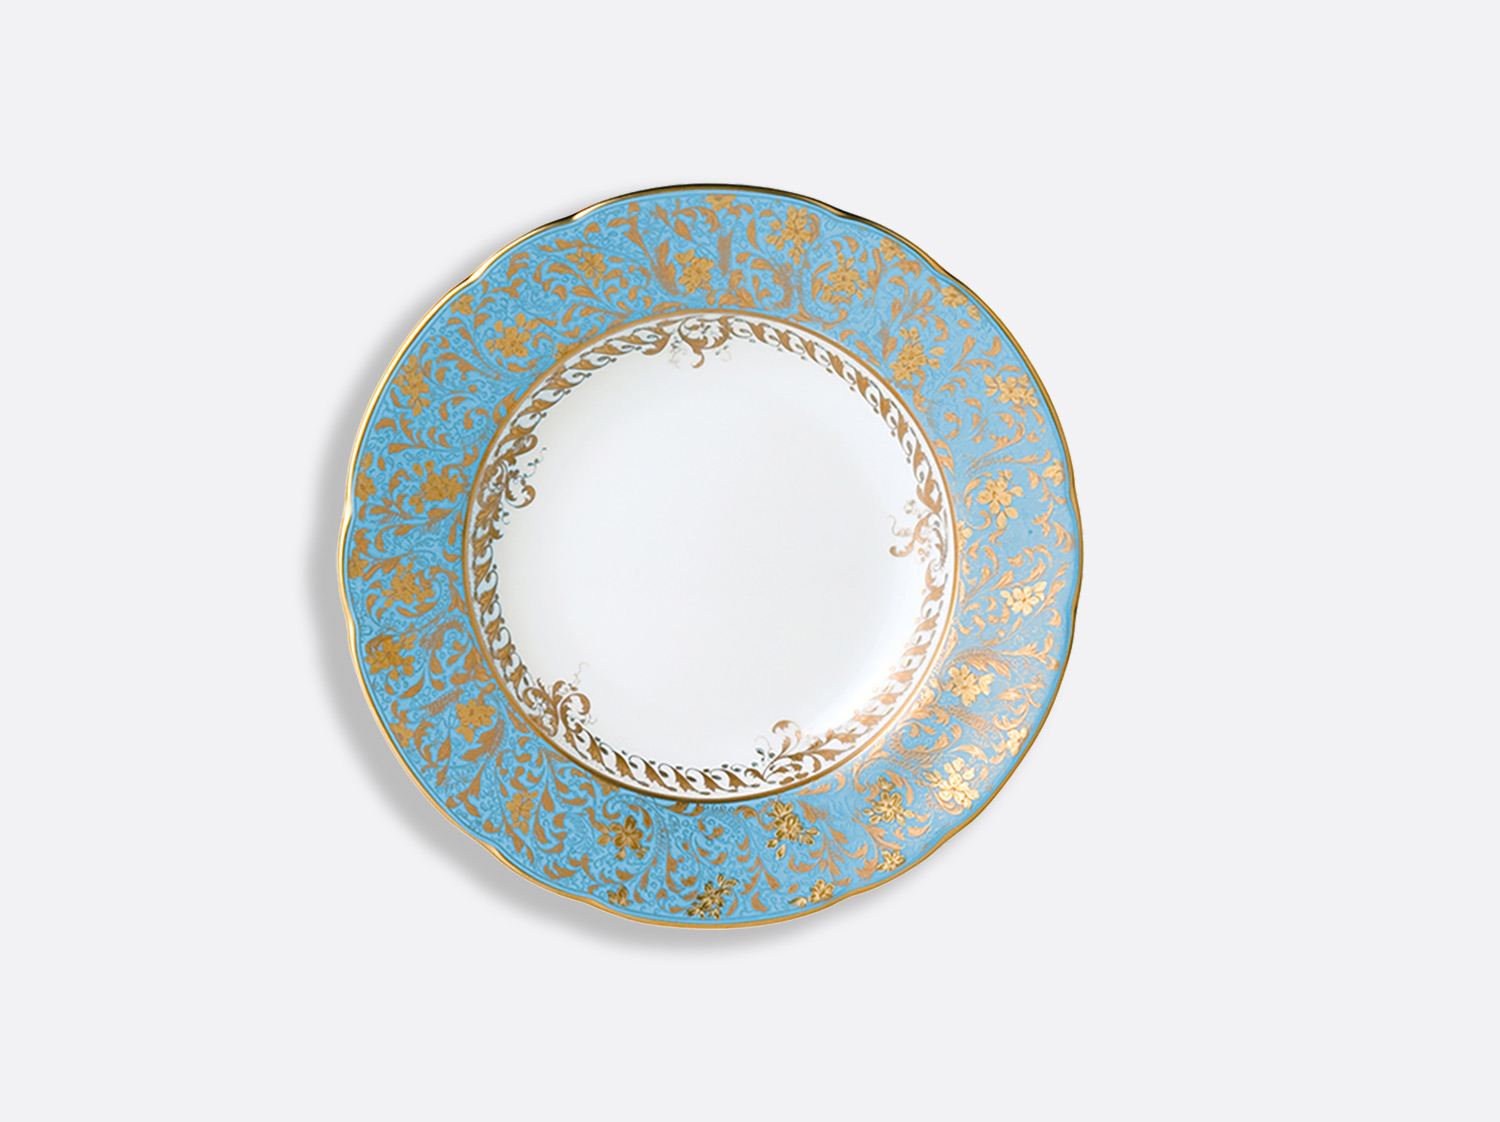 China Rim soup 9" of the collection Eden turquoise | Bernardaud